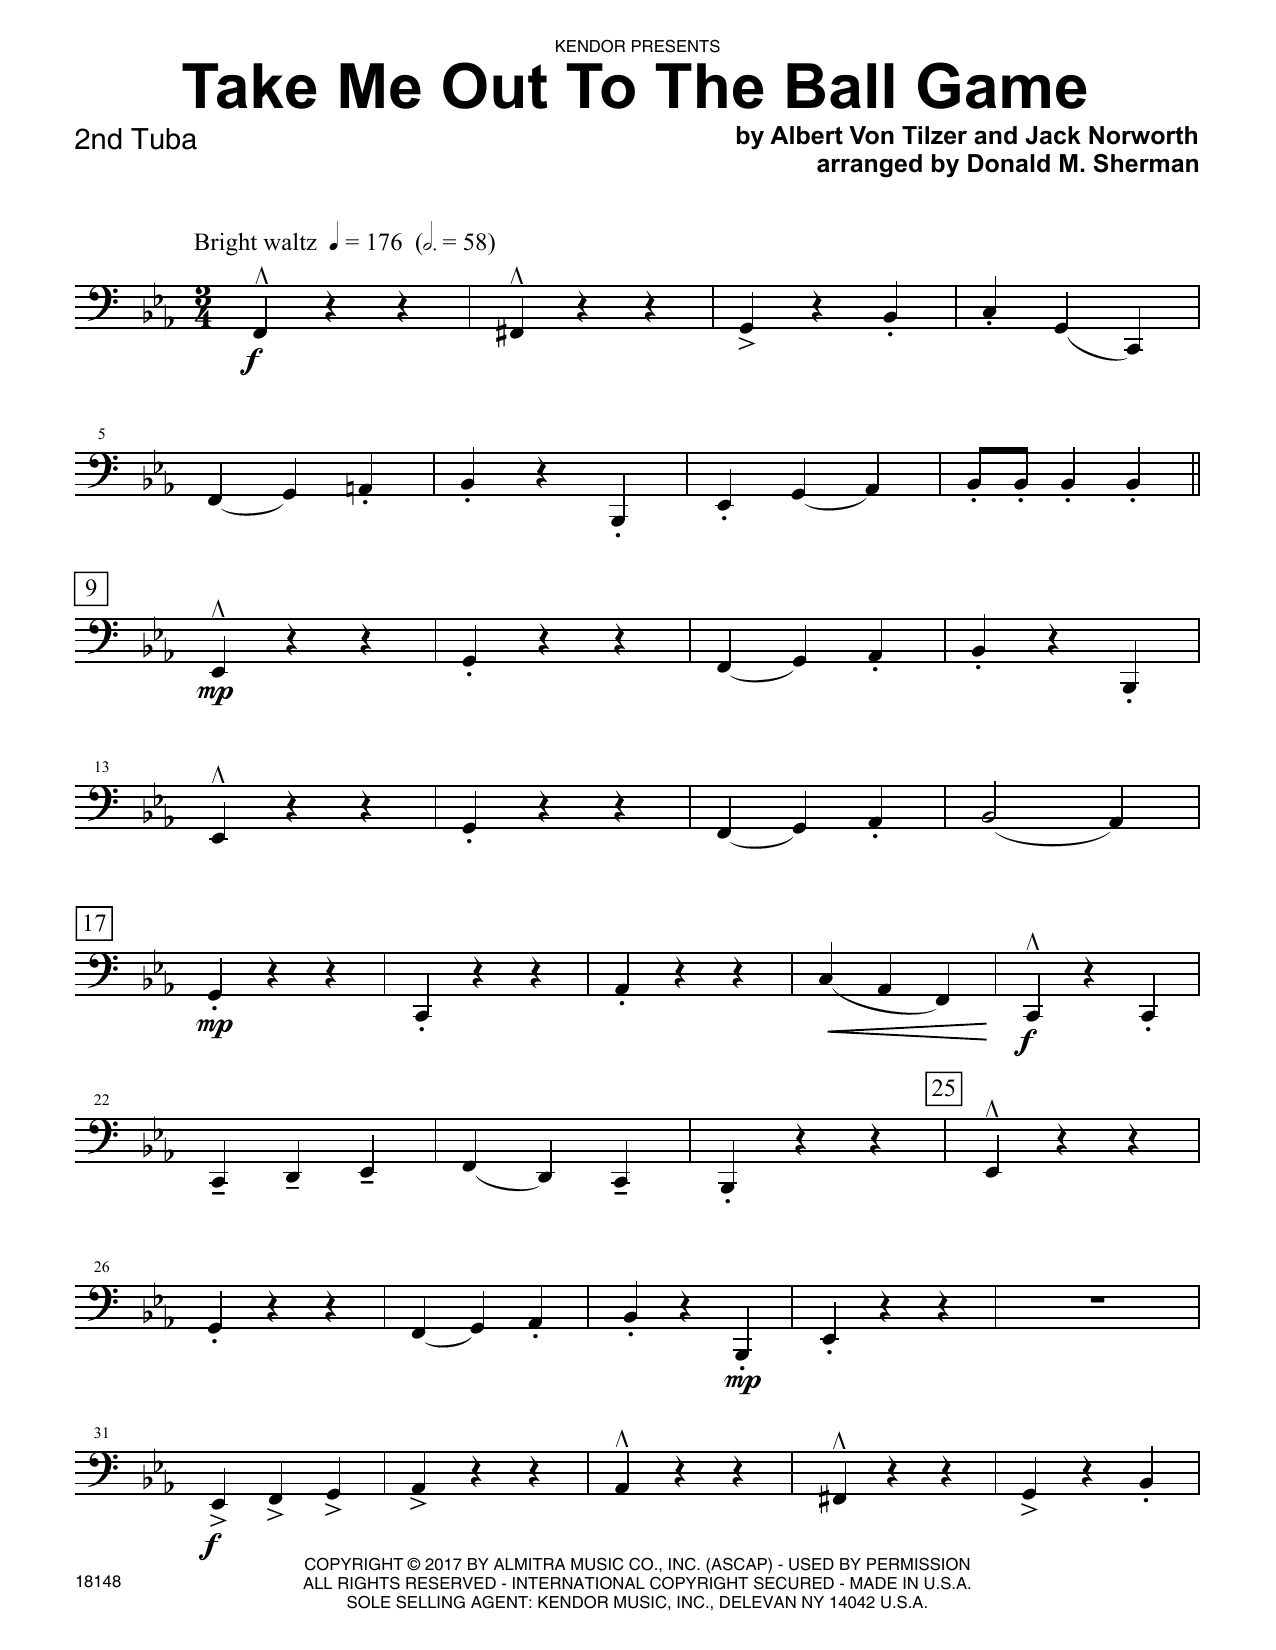 Download Donald M. Sherman Take Me Out To The Ball Game - 2nd Tuba Sheet Music